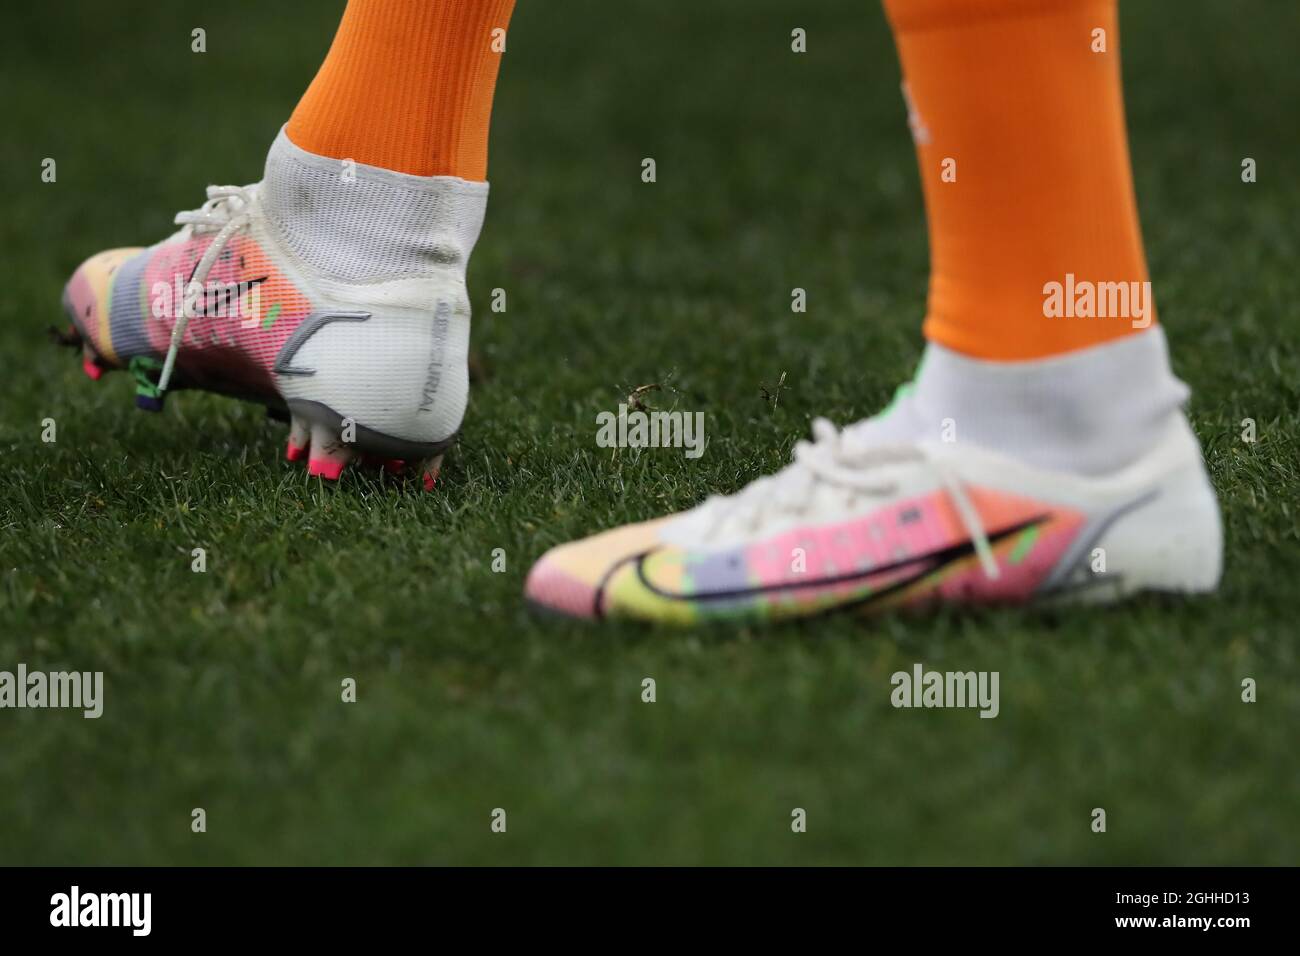 Cristiano Ronaldo of Juventus's new Nike Mercurial football boots are seen  during the warm up prior to the Serie A match at Luigi Ferraris, Genoa.  Picture date: 30th January 2021. Picture credit